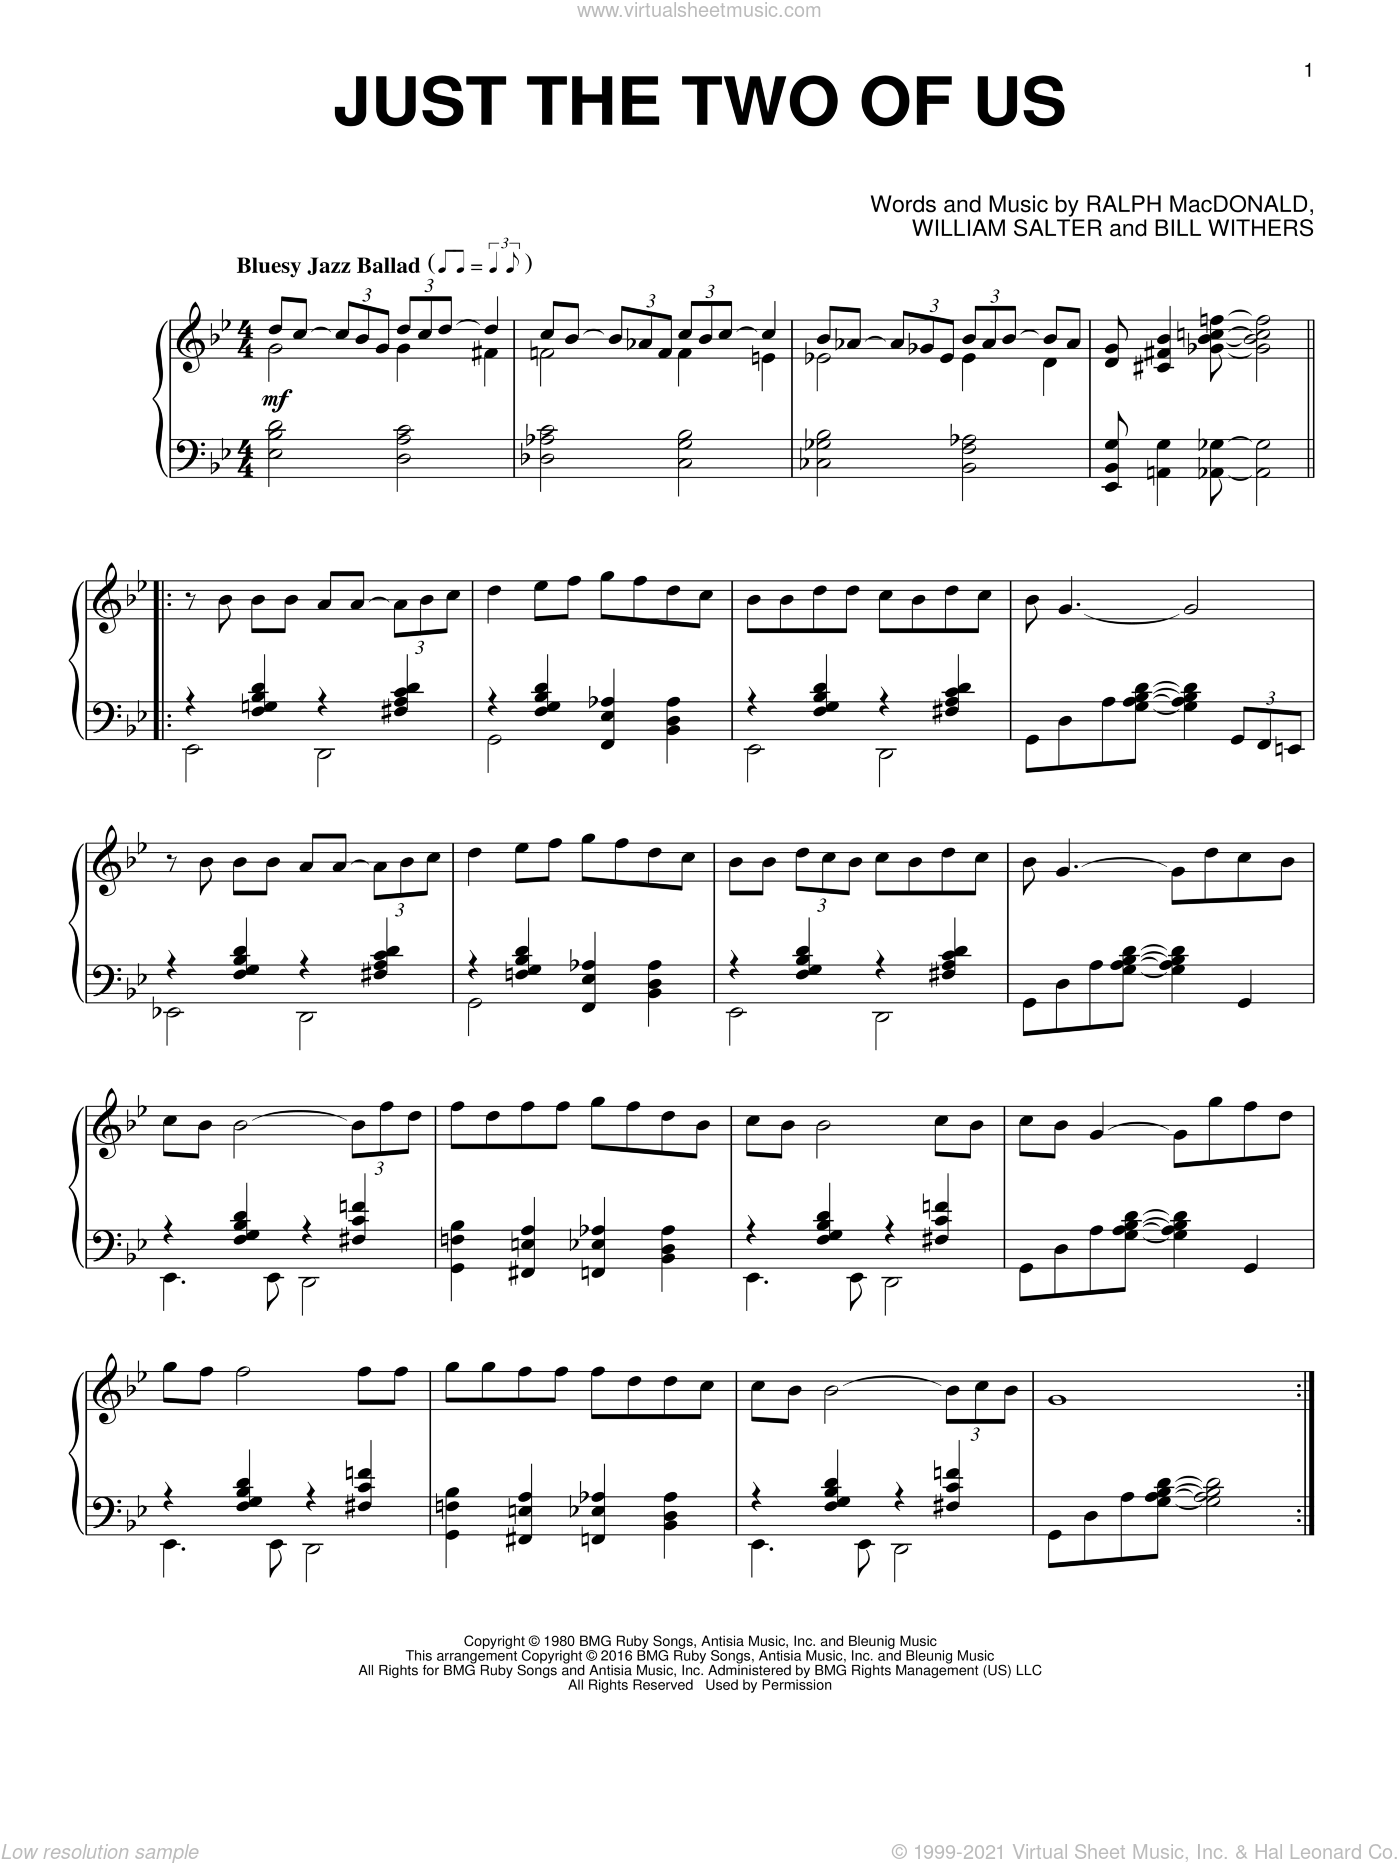 ☆ Bill Withers-Just The Two Of Us Sheet Music pdf, - Free Score Download ☆